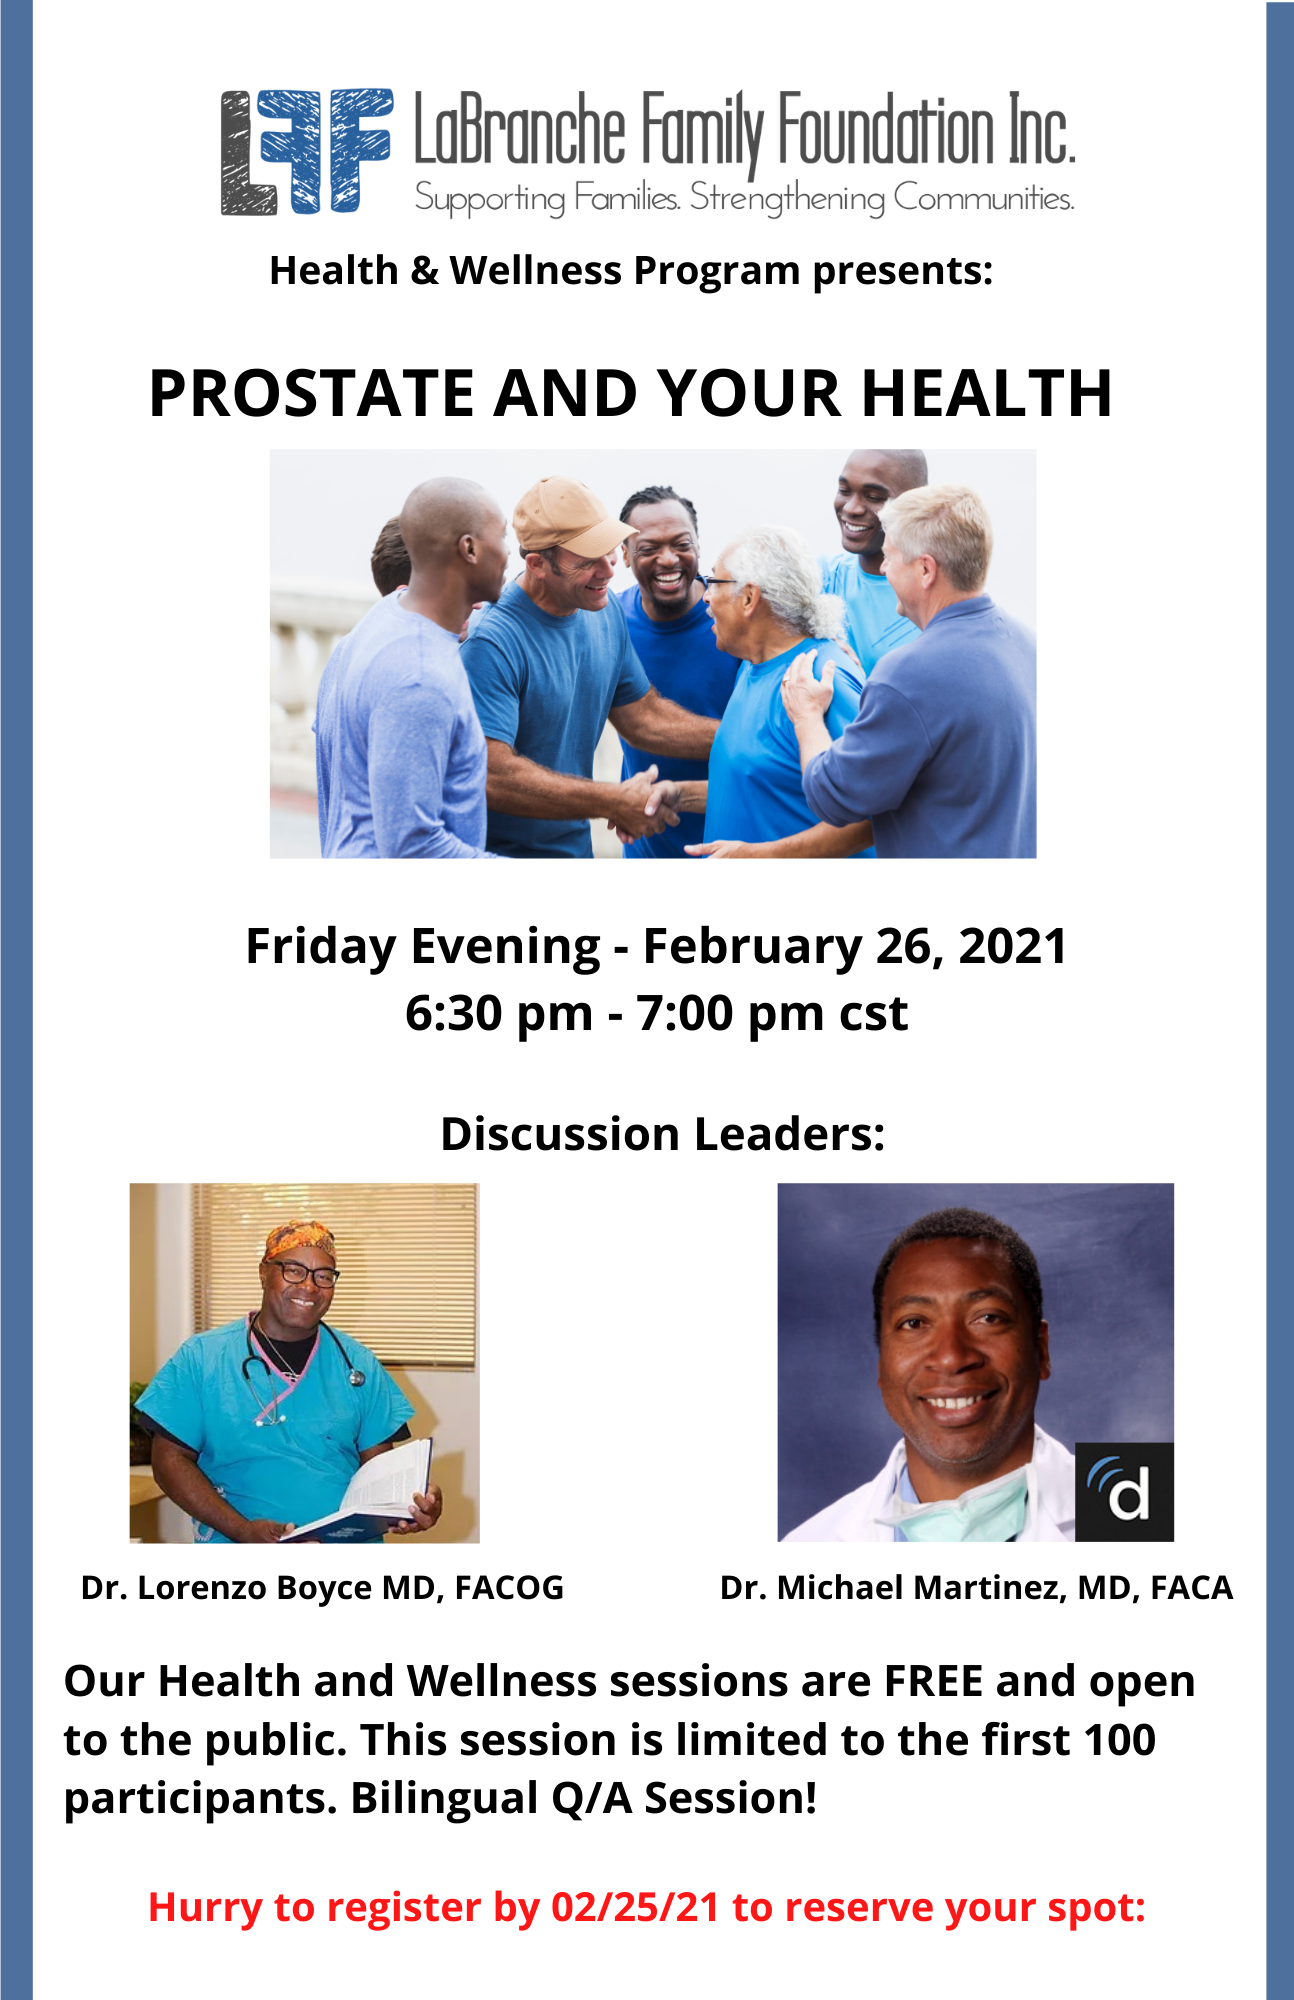 PROSTATE CANCER AND YOUR HEALTH